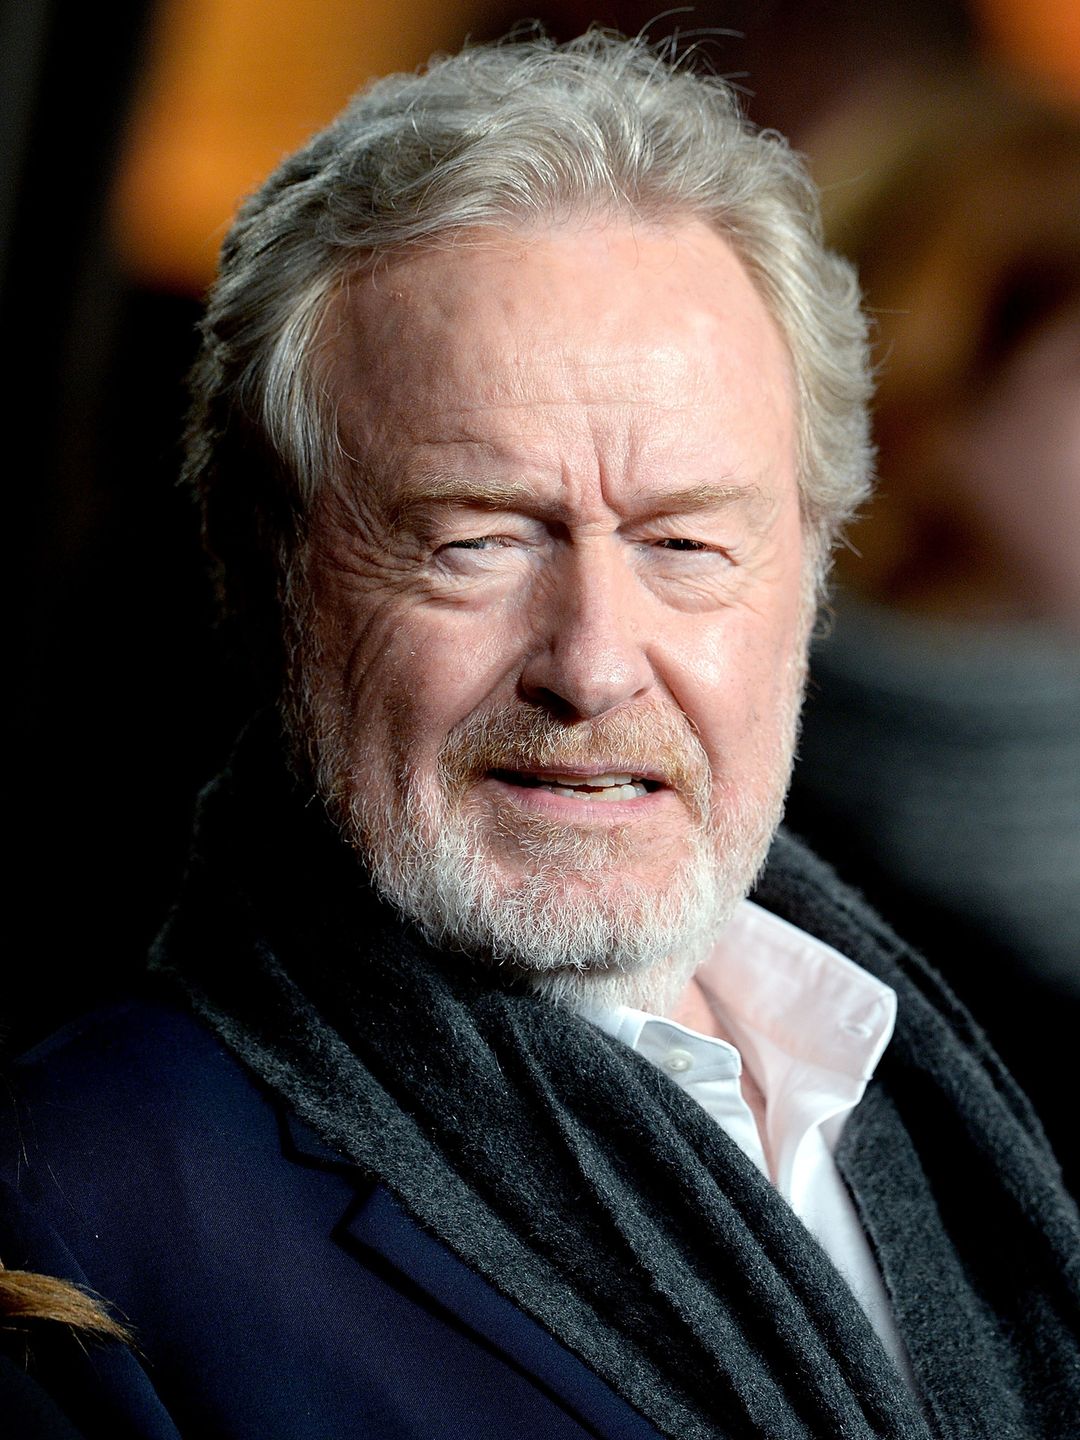 Ridley Scott who is his father